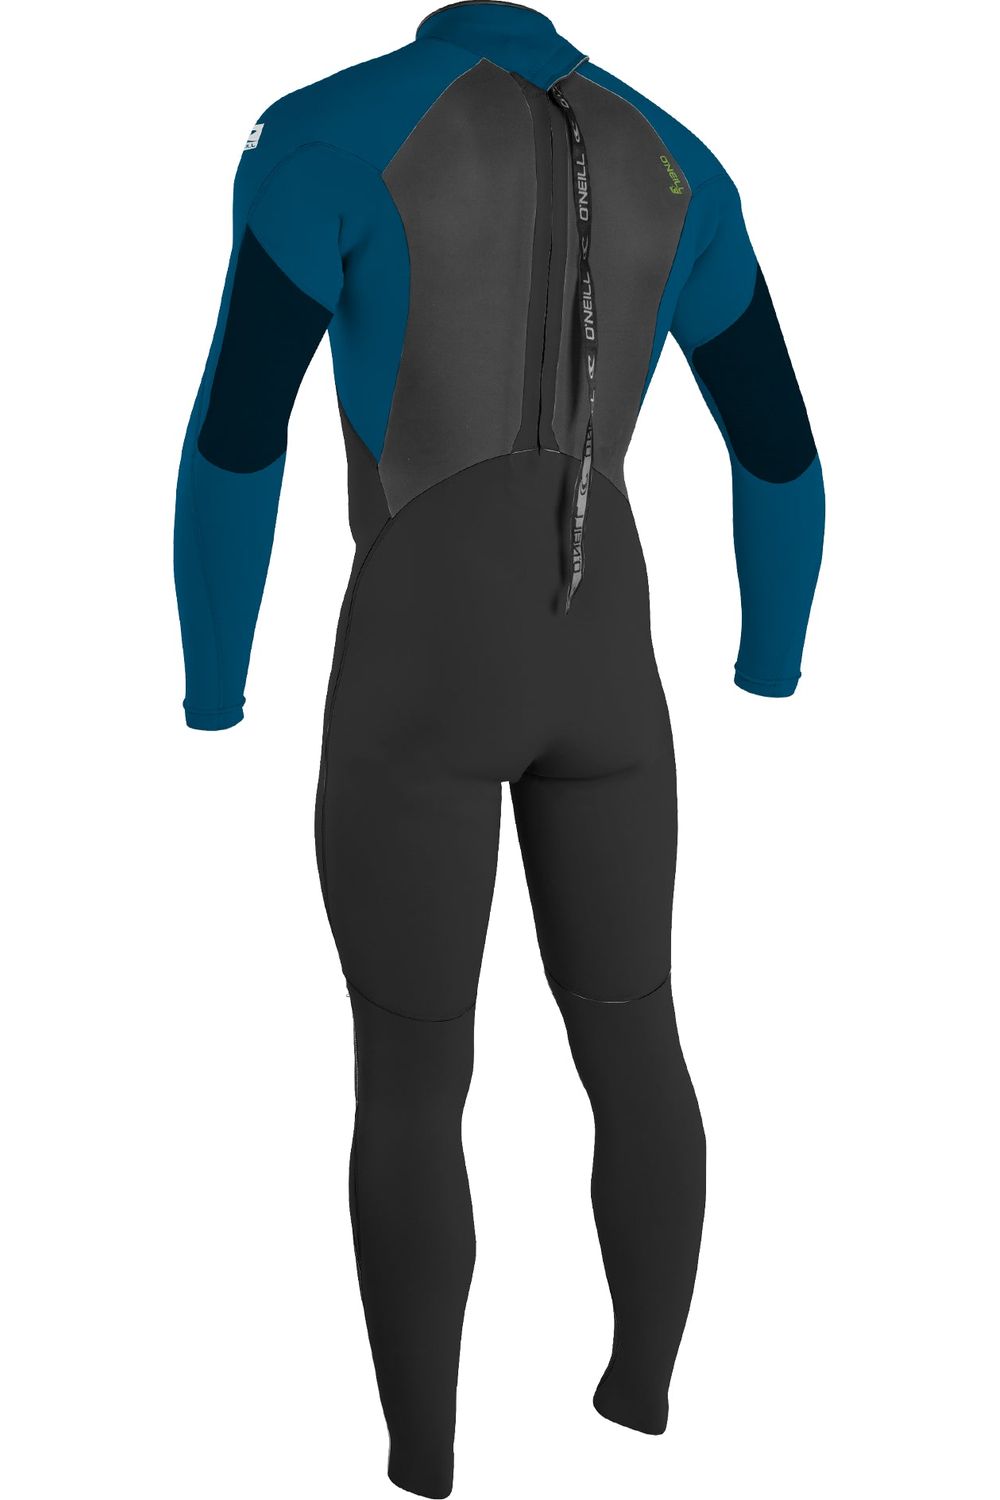 O'Neill Epic Youth 4/3 Back Zip Black Ultrablue Dayglo